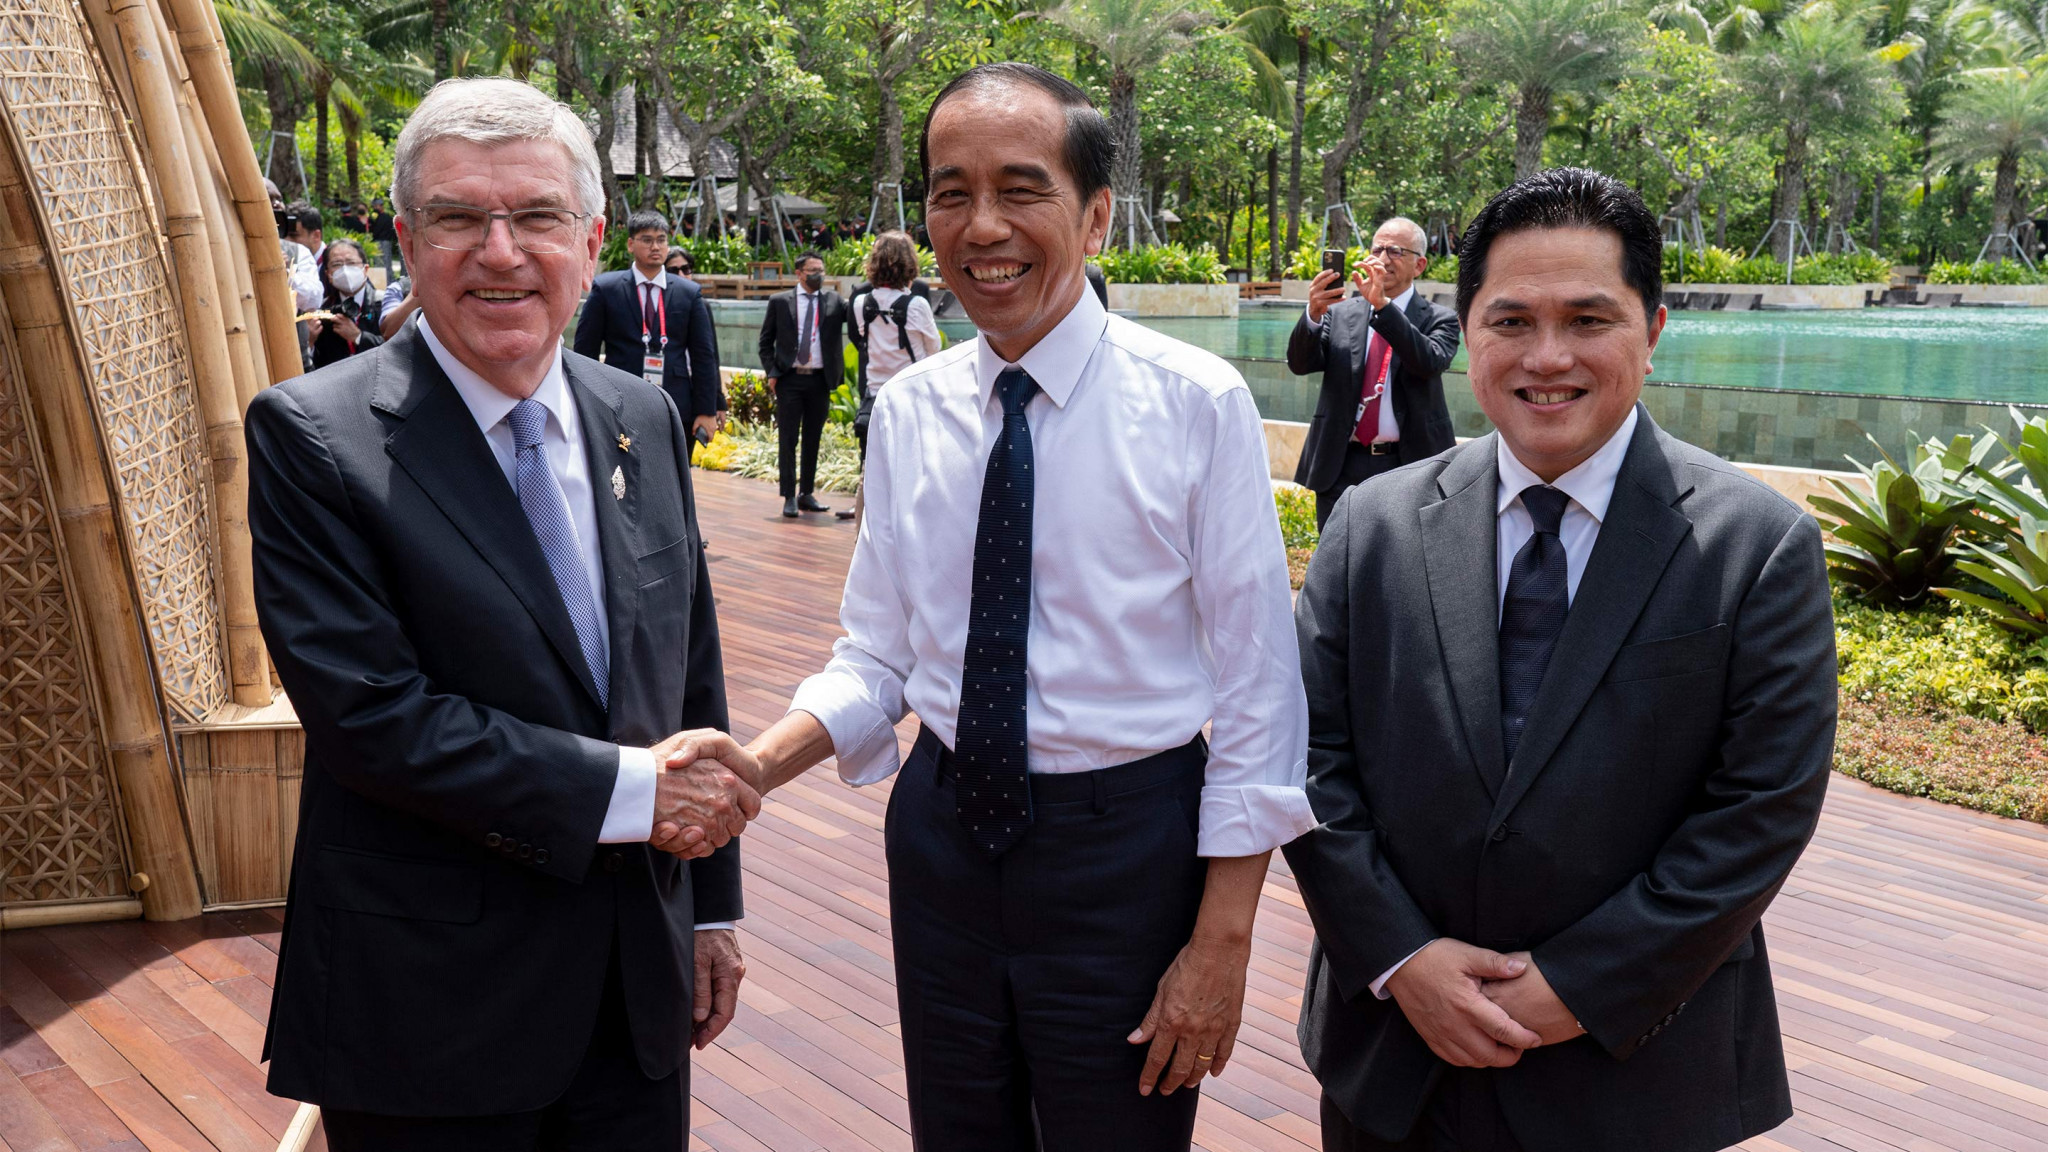 Bach welcomes Widodo's confirmation of 2036 Indonesia Olympic and Paralympic bid